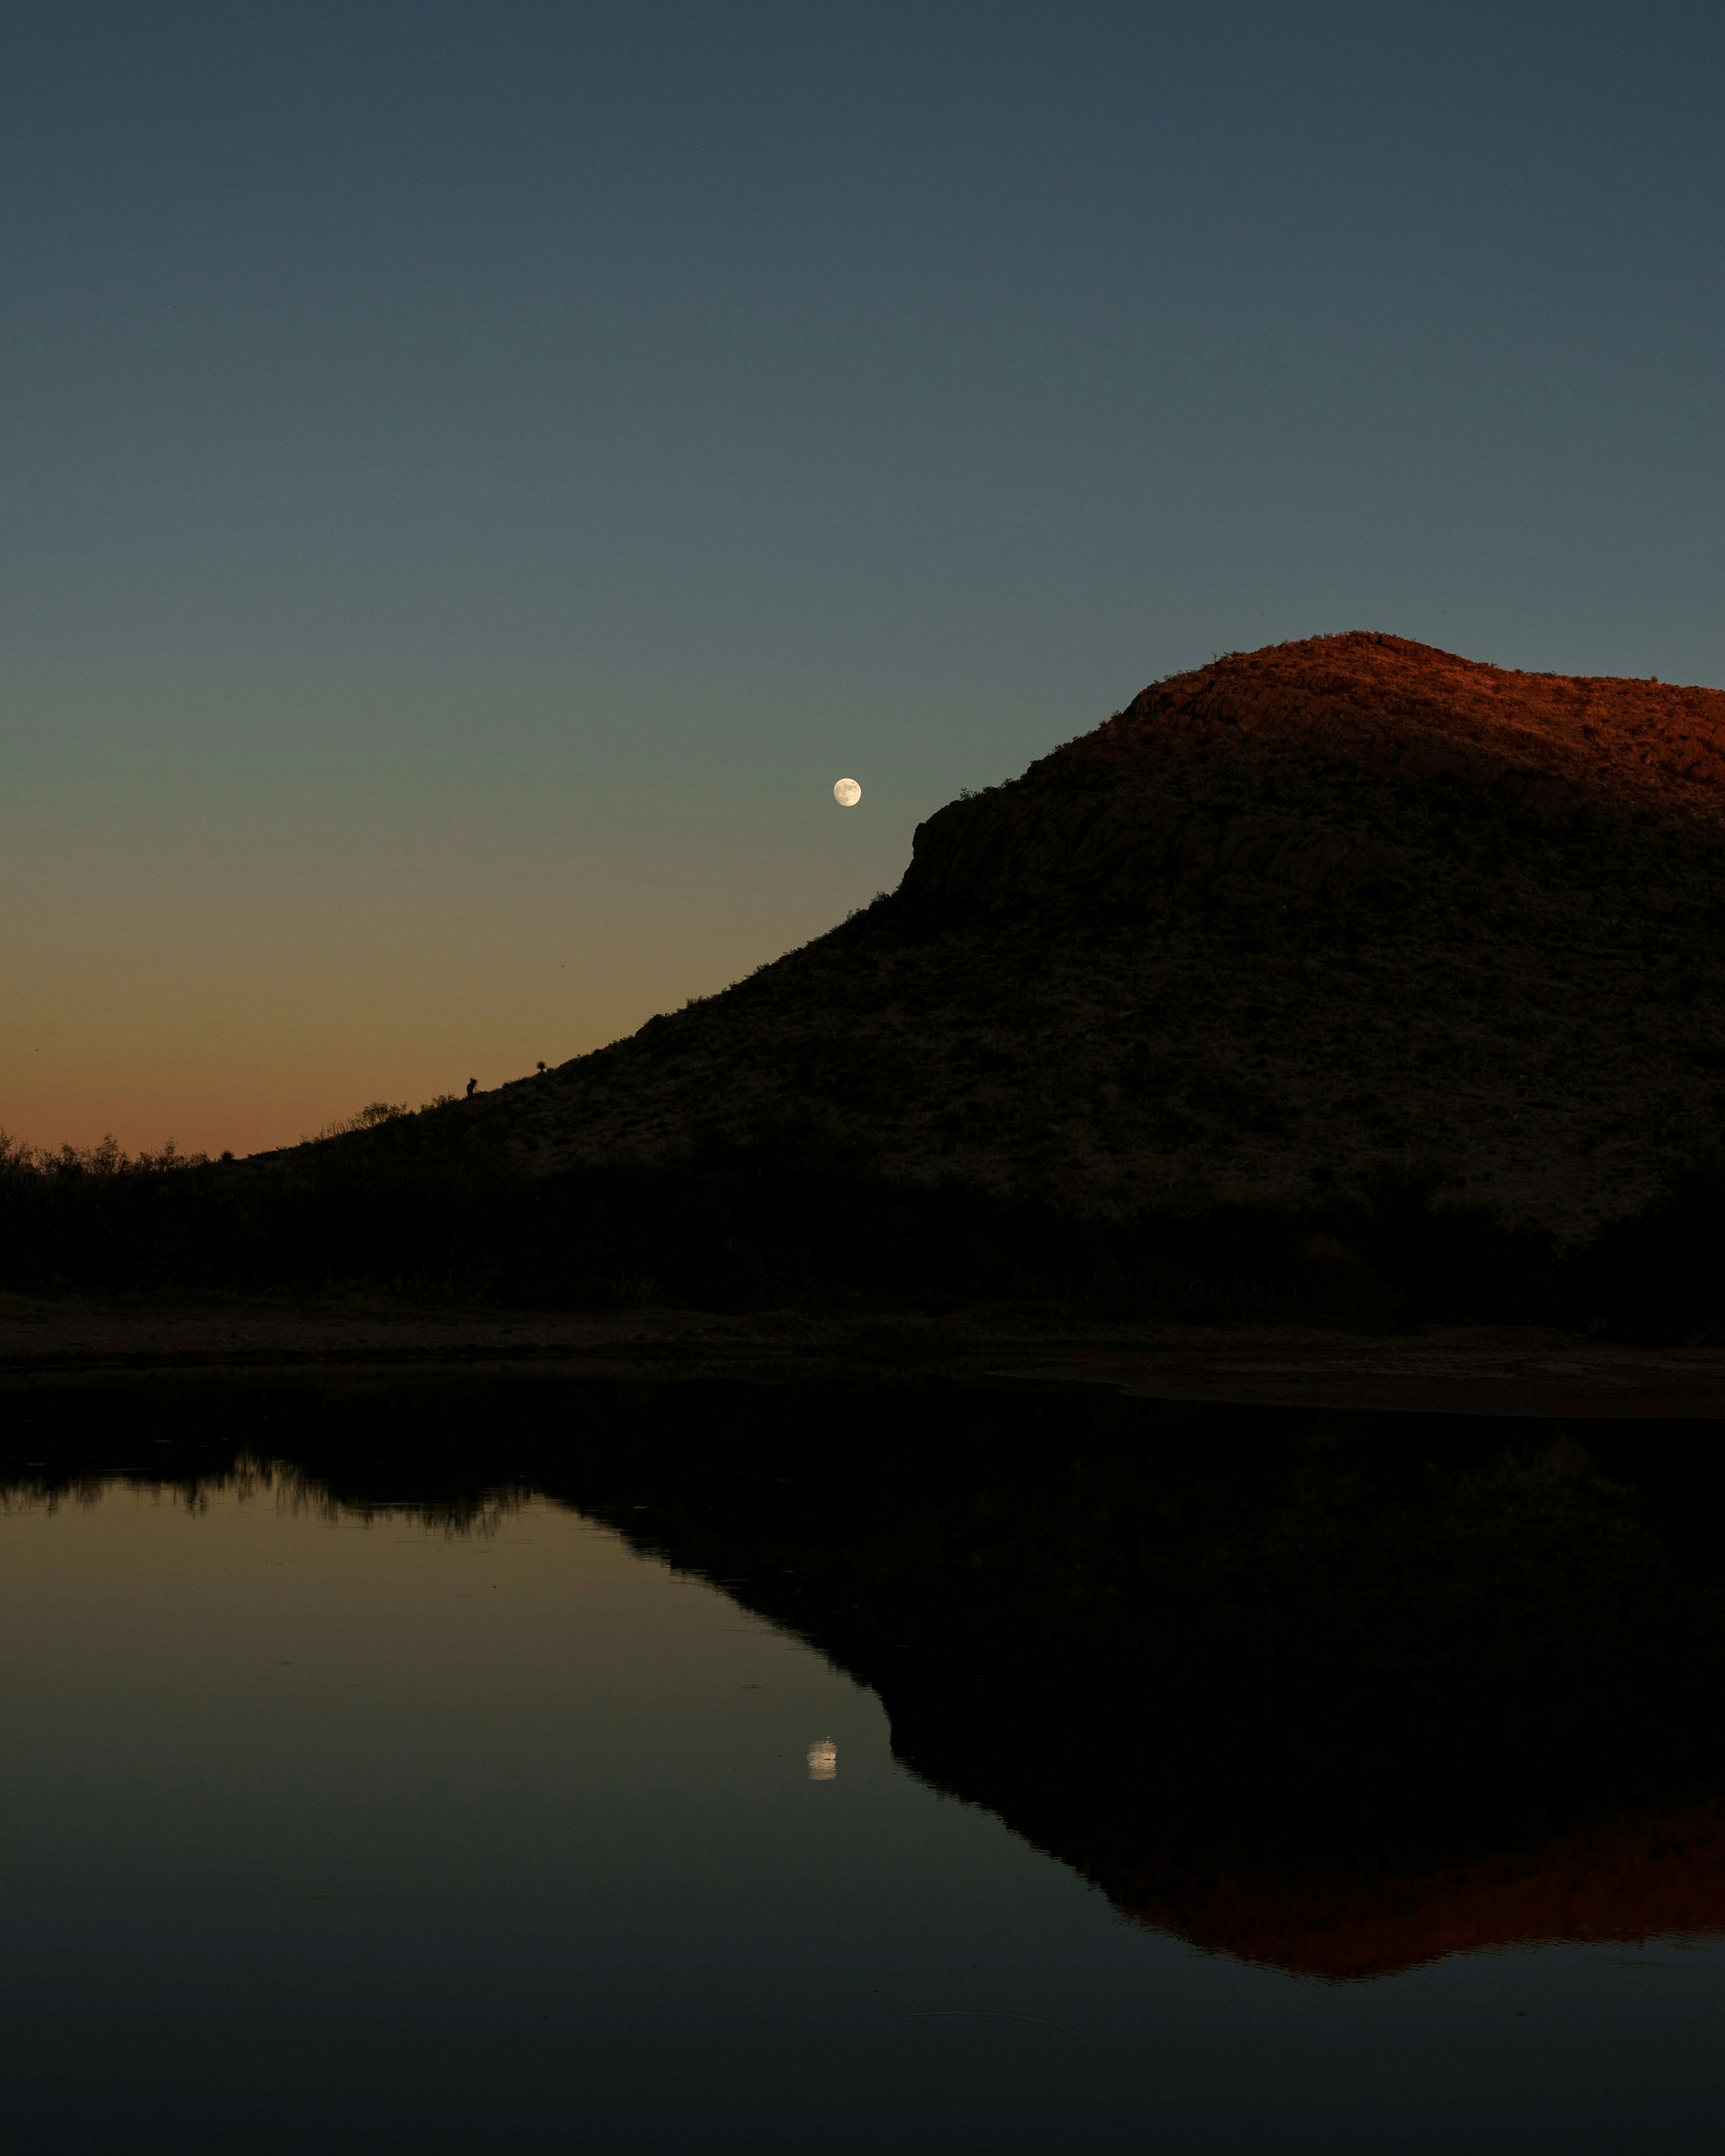 A view from the banks of the Five Mile Tank at sunset where a group of migrants were shot at by Michael and Mark Sheppard in late September, near Sierra Blanca, Texas on Sunday November 6, 2022. 
Photo: Paul Ratje for The Intercept